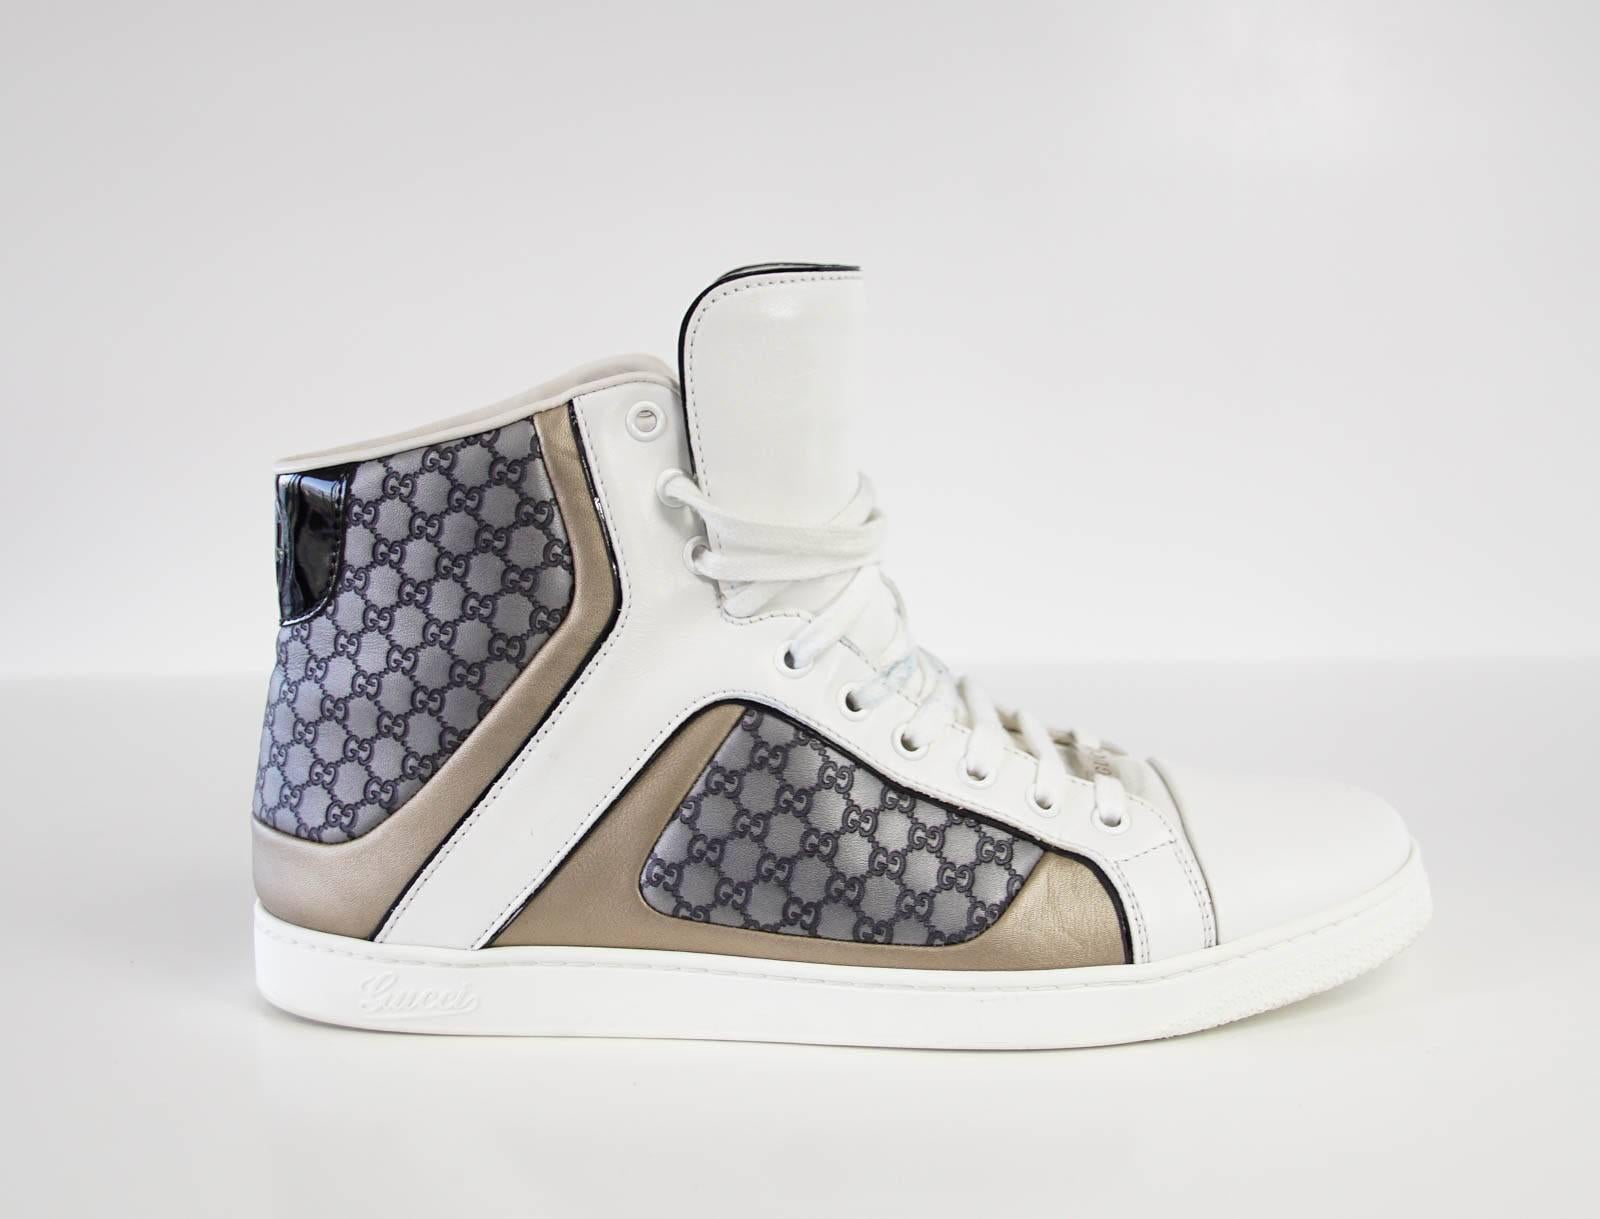 Guaranteed authentic Gucci men's white leather high top sneaker with embossed grey monogram and gold trim.
Black patent leather GG at rear and trim.
Comes with signature box.
final sale

USA SIZE  9.5 G

CONDITION:
MINT
